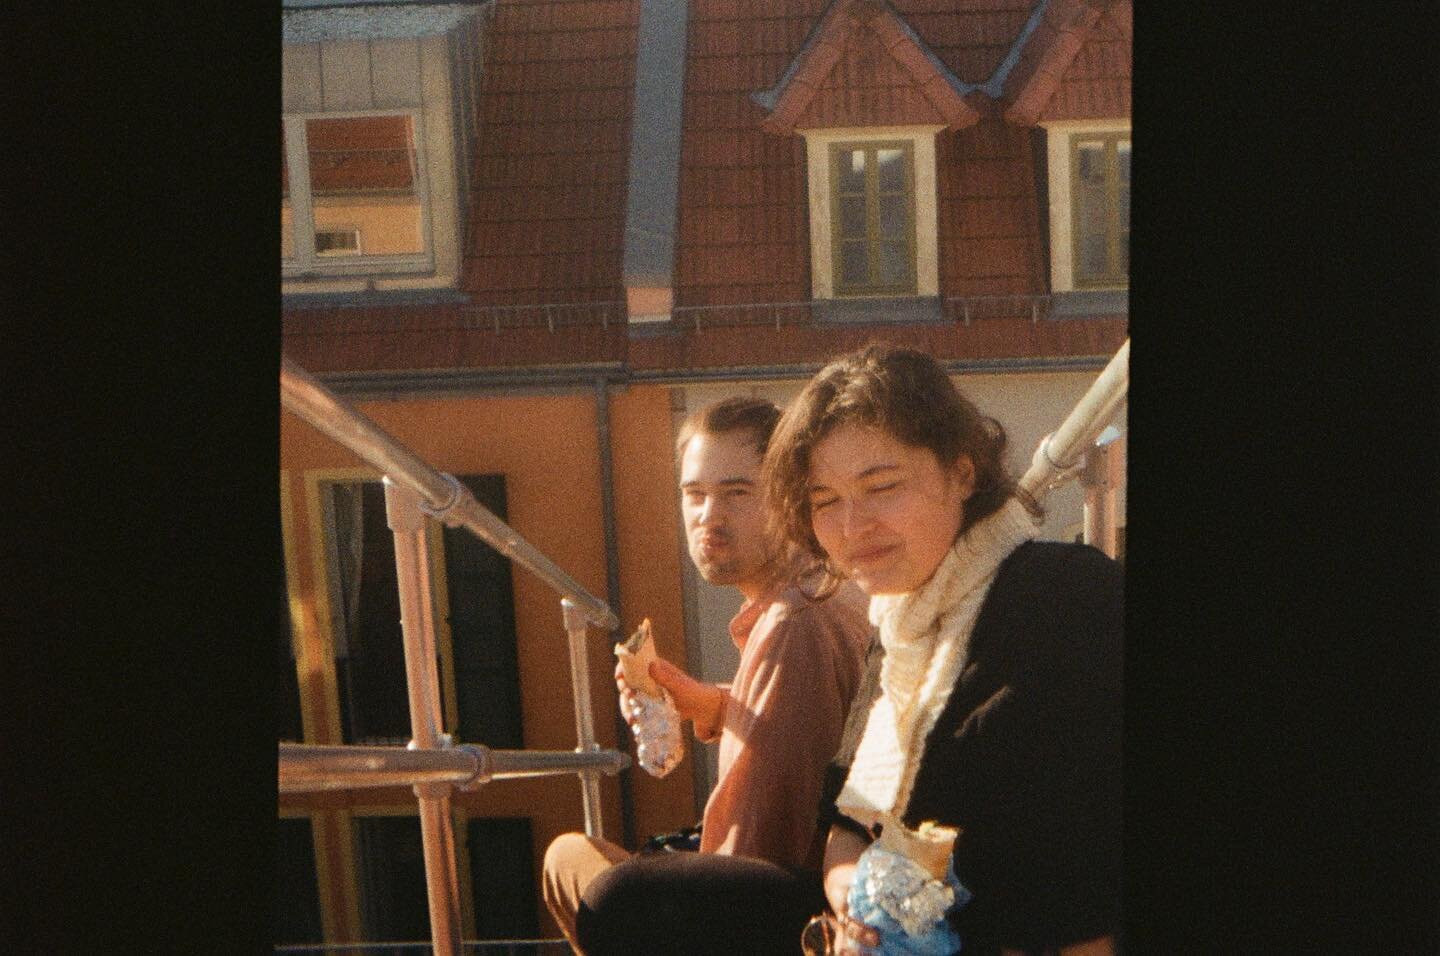 blast from the past - traveling golden angel friend @v_____hjl just developed some film from her visit to us in Weimar way way long ago- an experience cut swiftly short by Covid but sweet nonetheless! D&ouml;ner eaten on the roof of our beautiful att